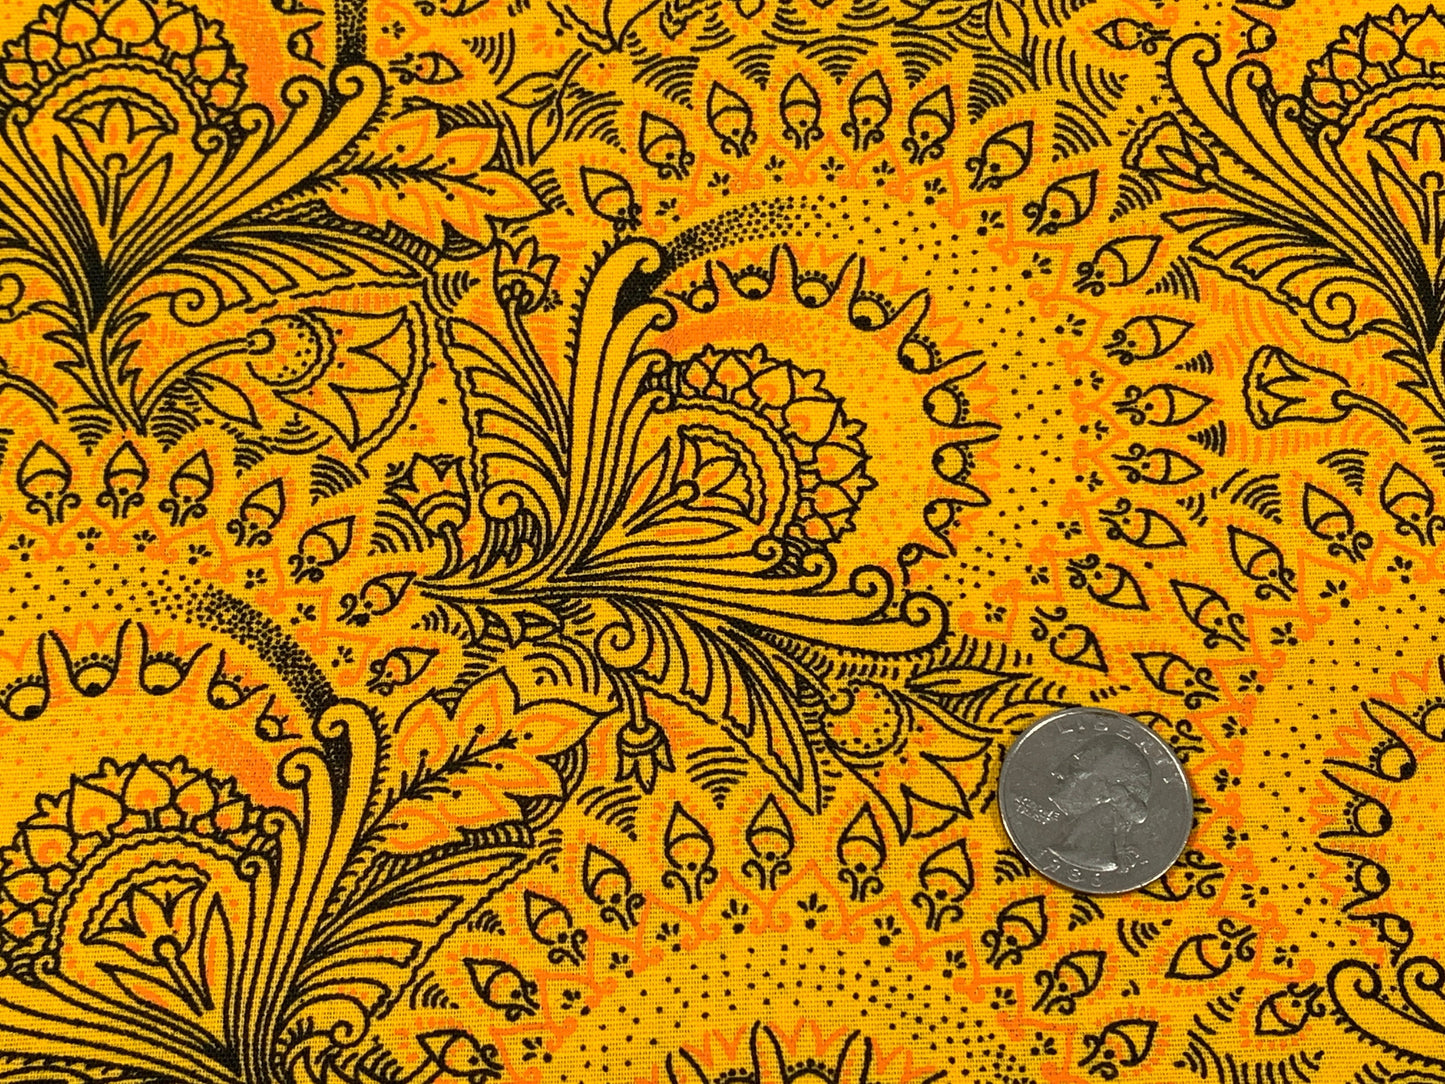 Yellow South African Shweshwe Fabric by the YARD. DaGama 3 Cats Large Yellow Large Paisley. Cotton Print Fabric for Quilting, Apparel, Décor